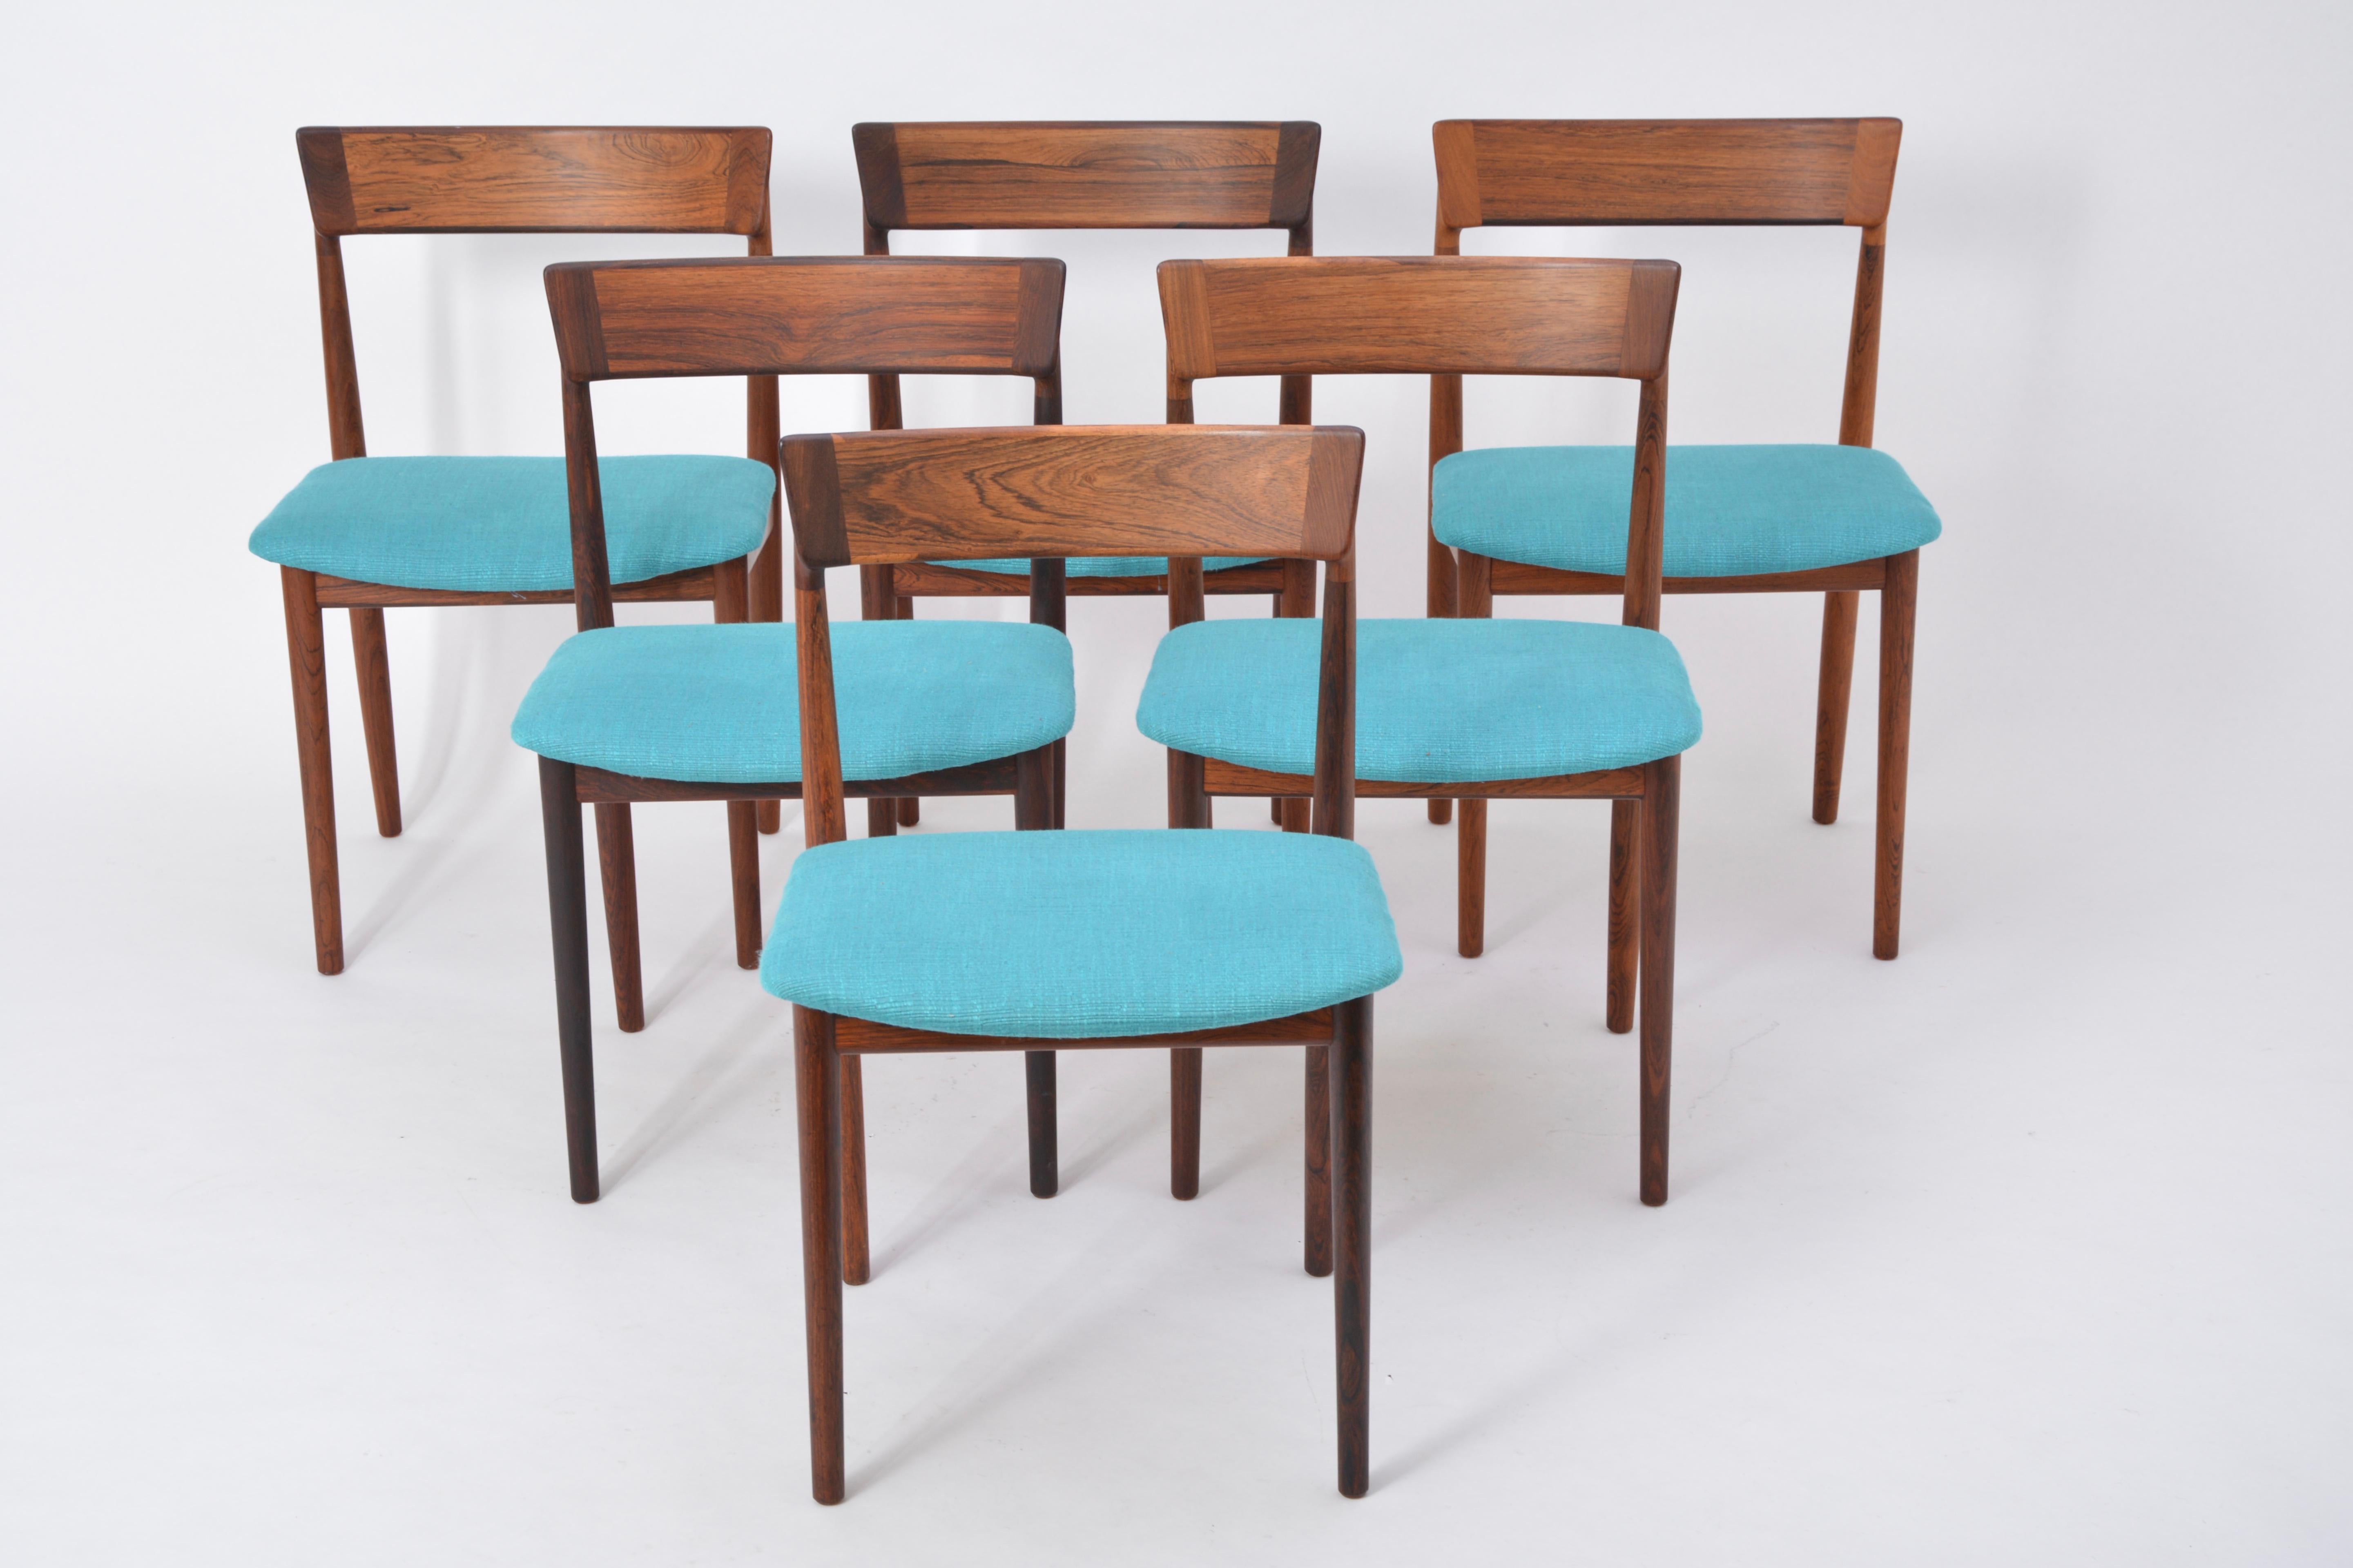 Set of six rosewood dining chairs, model 39, designed by Henry Rosengren Hansen and produced by Brande Møbelfabrik in Denmark, probably in the 1960s. Reupholstered with a turquoise fabric.